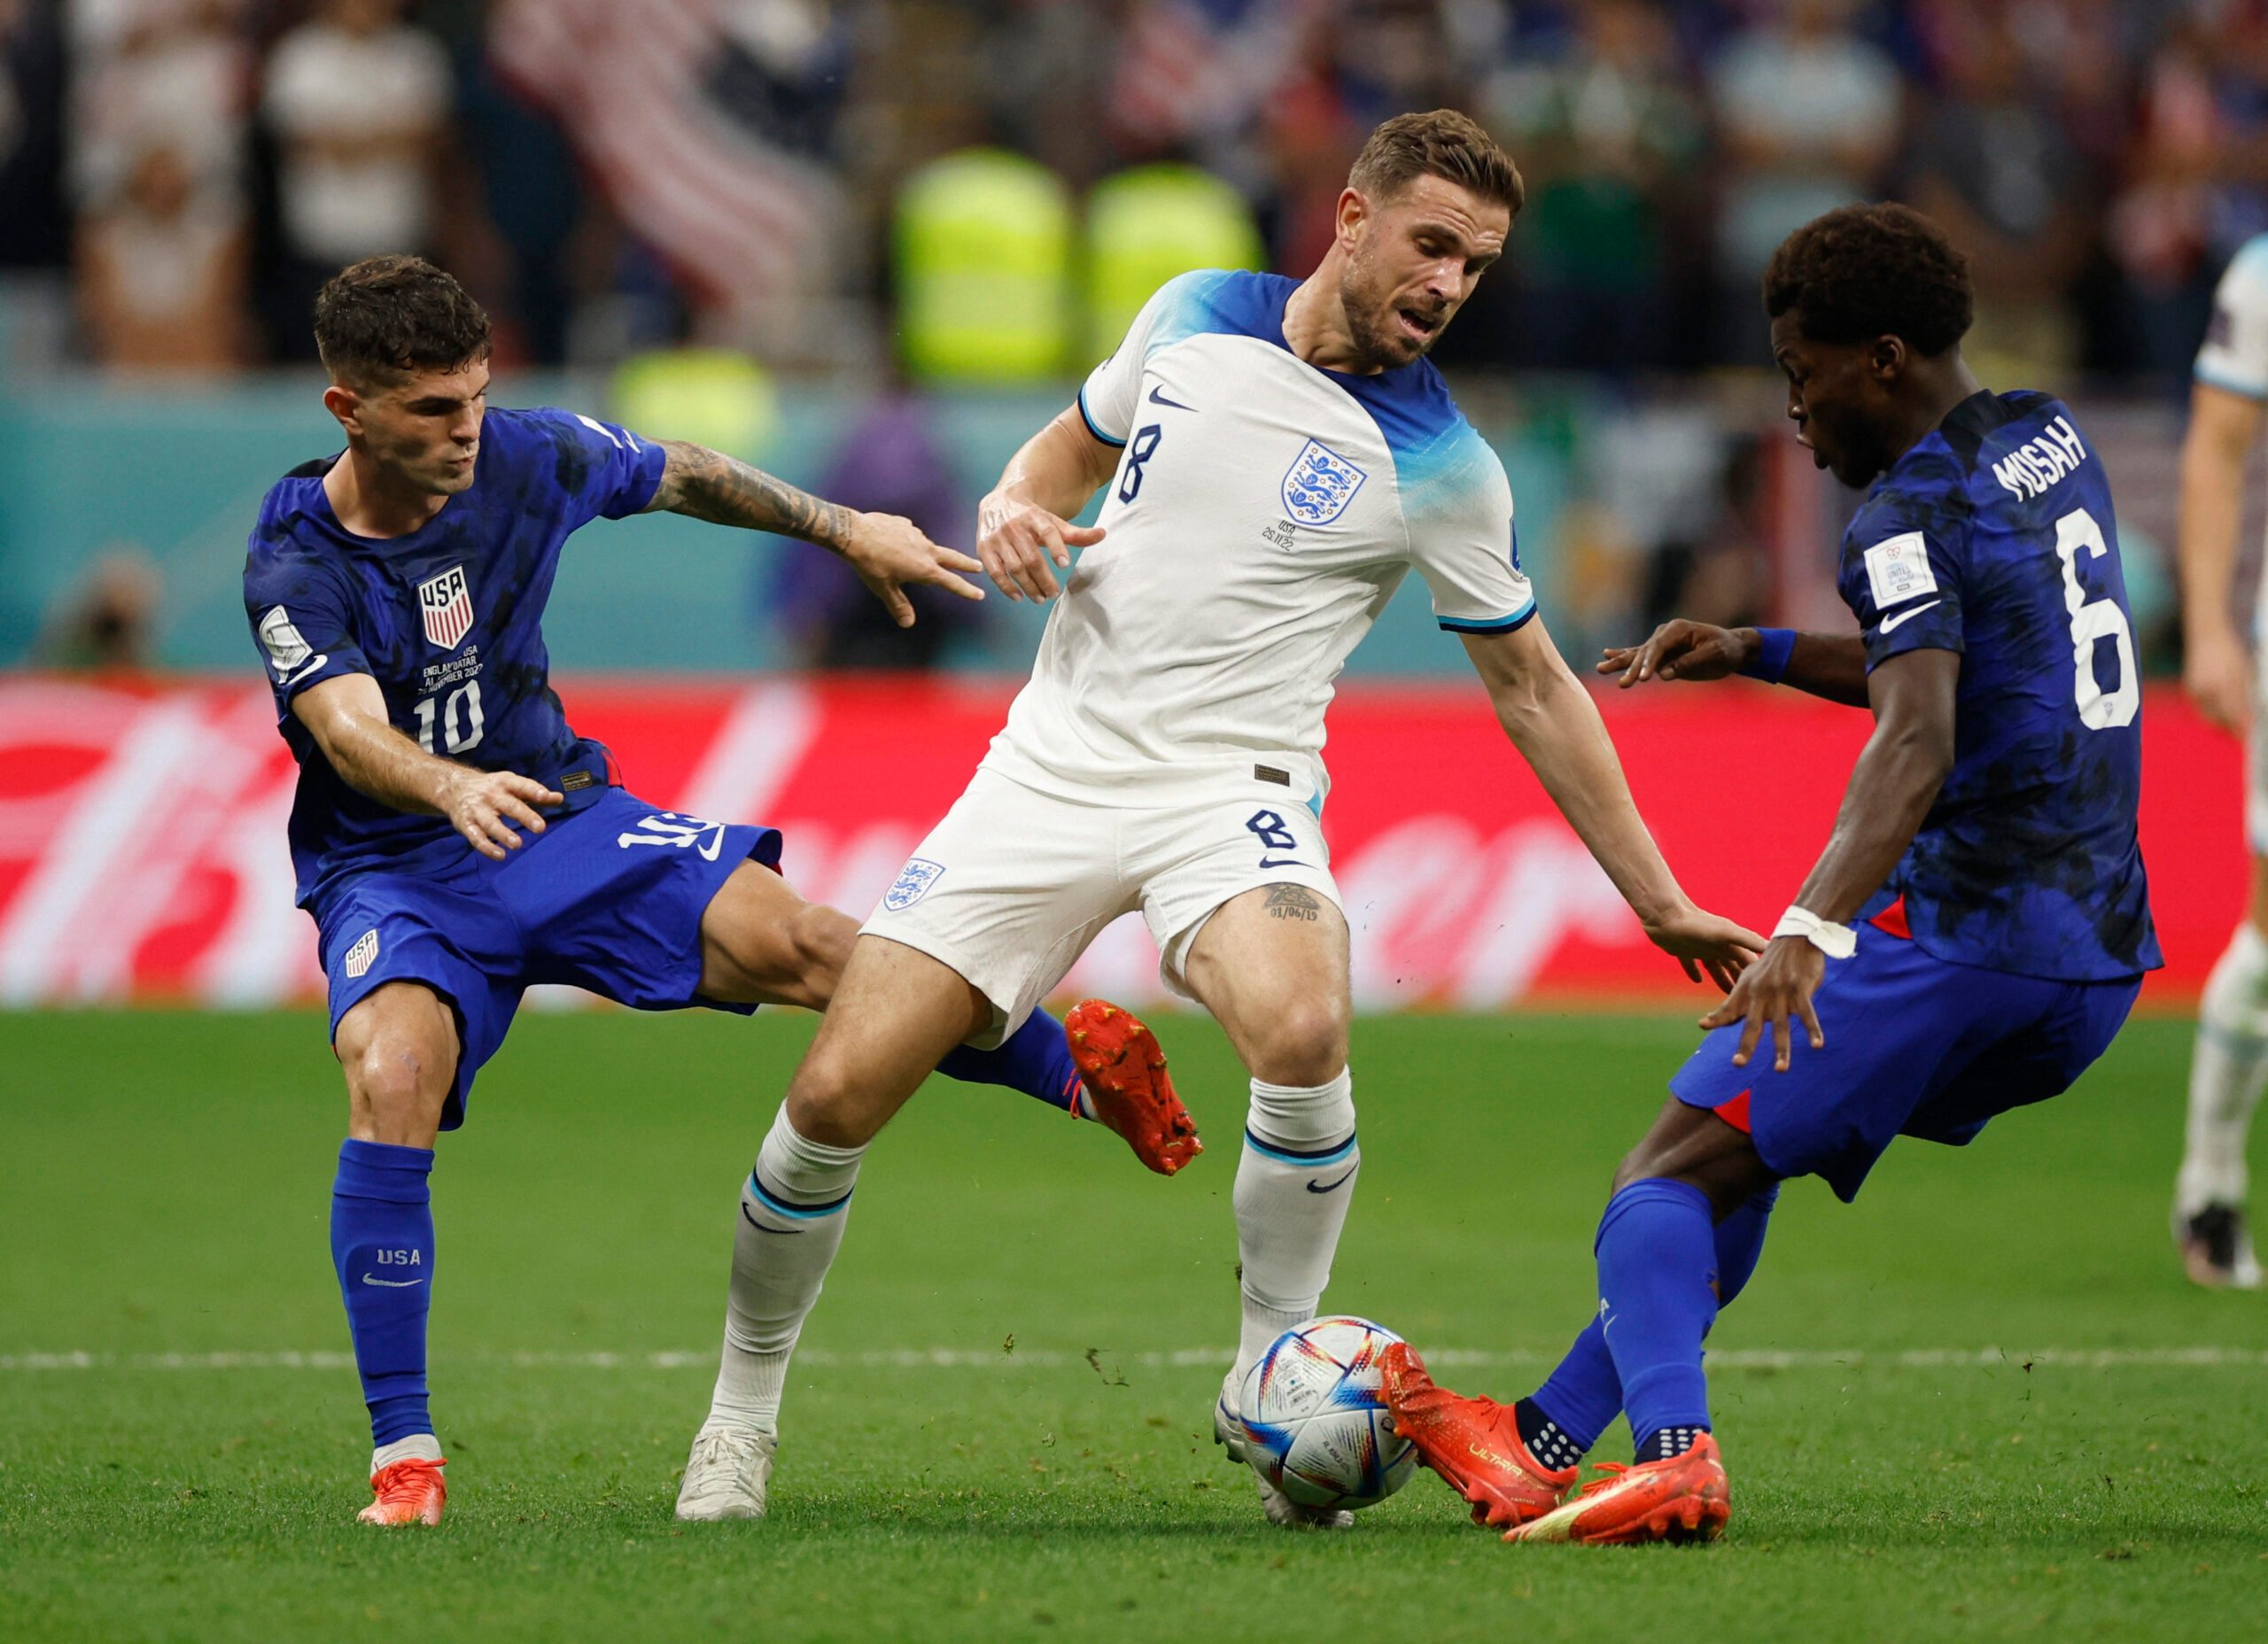 England showed grit not zip against US, Southgate says